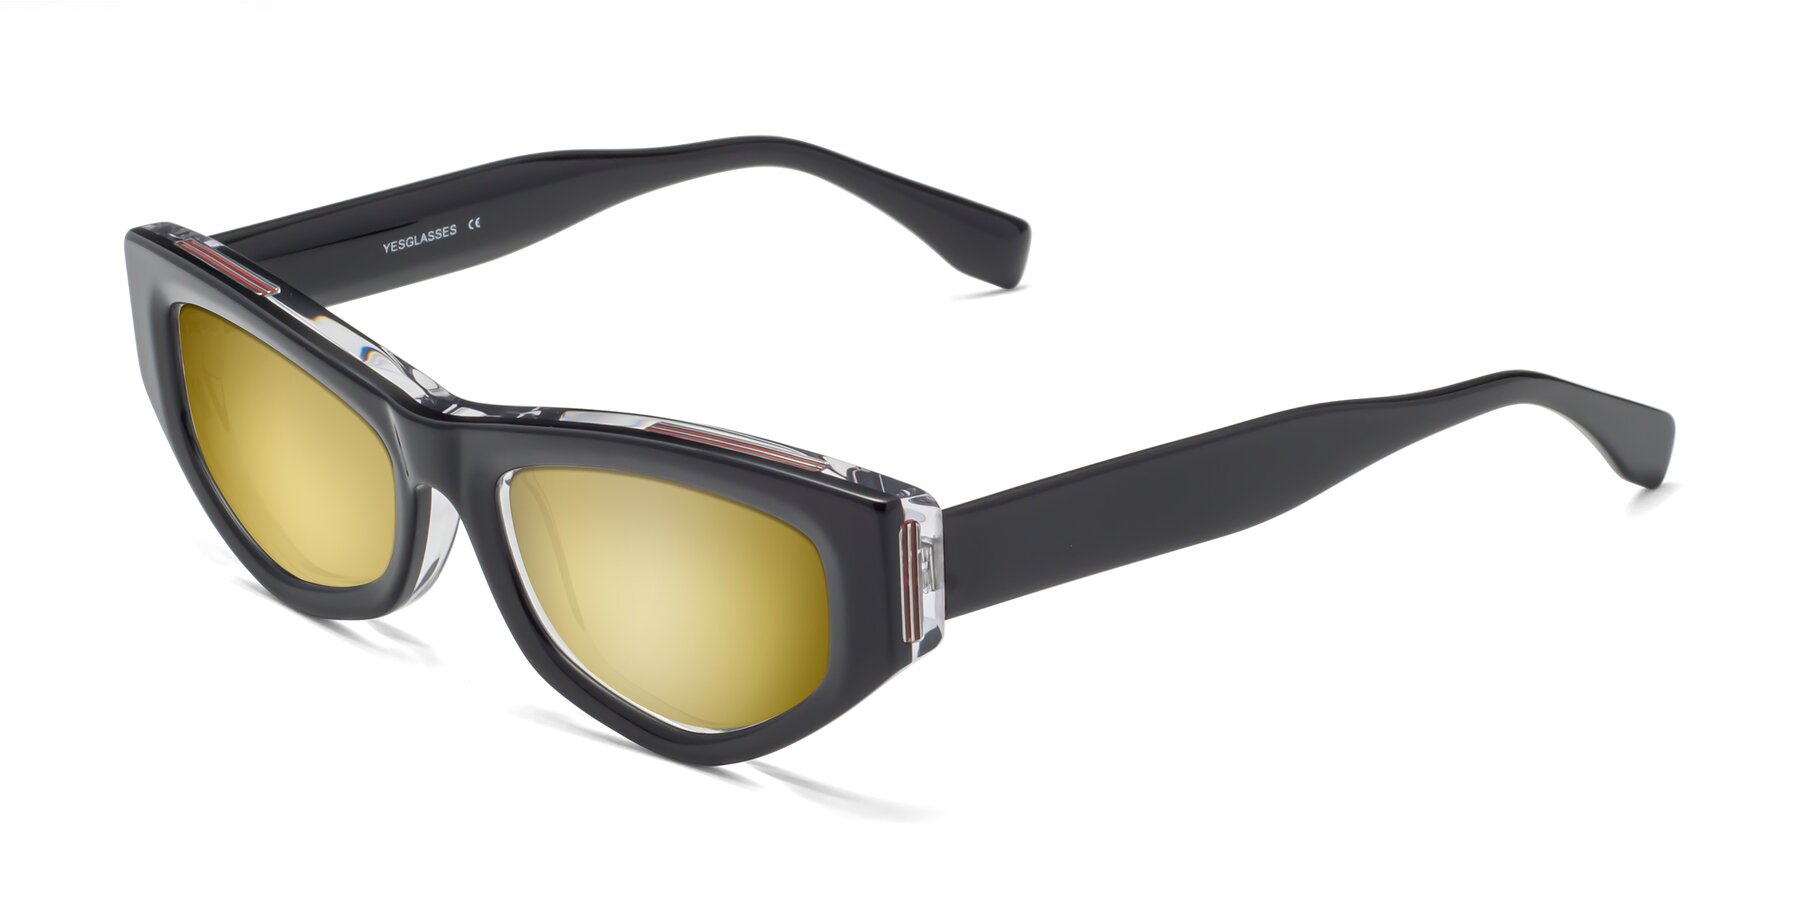 Clear Thick Geek-Chic Geometric Mirrored Sunglasses